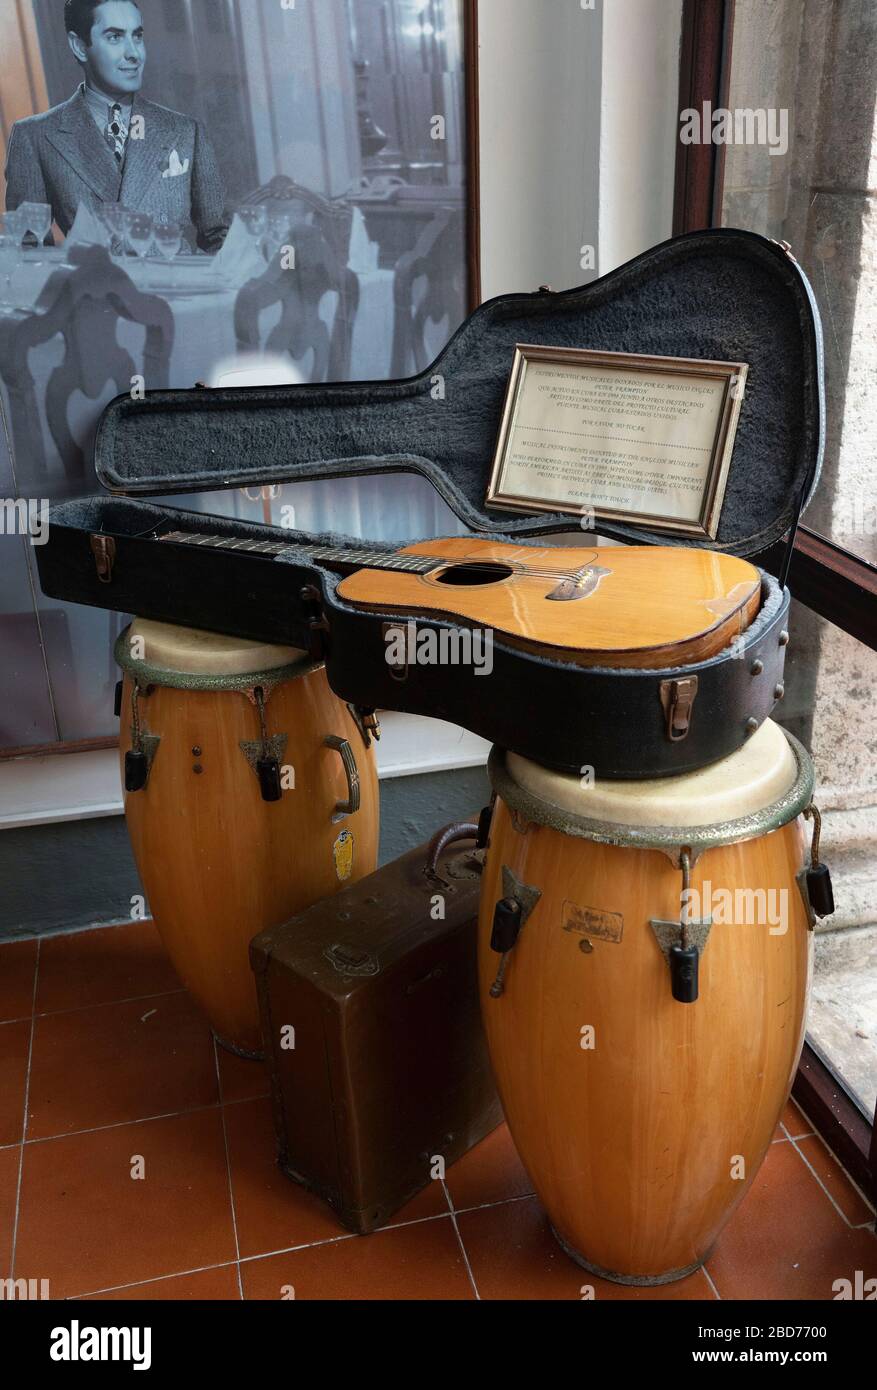 Hotel National de Cuba,Havana: guitar donated to the hotel by the English rock star Peter Frampton who played a concert in Havana in 1998 Stock Photo